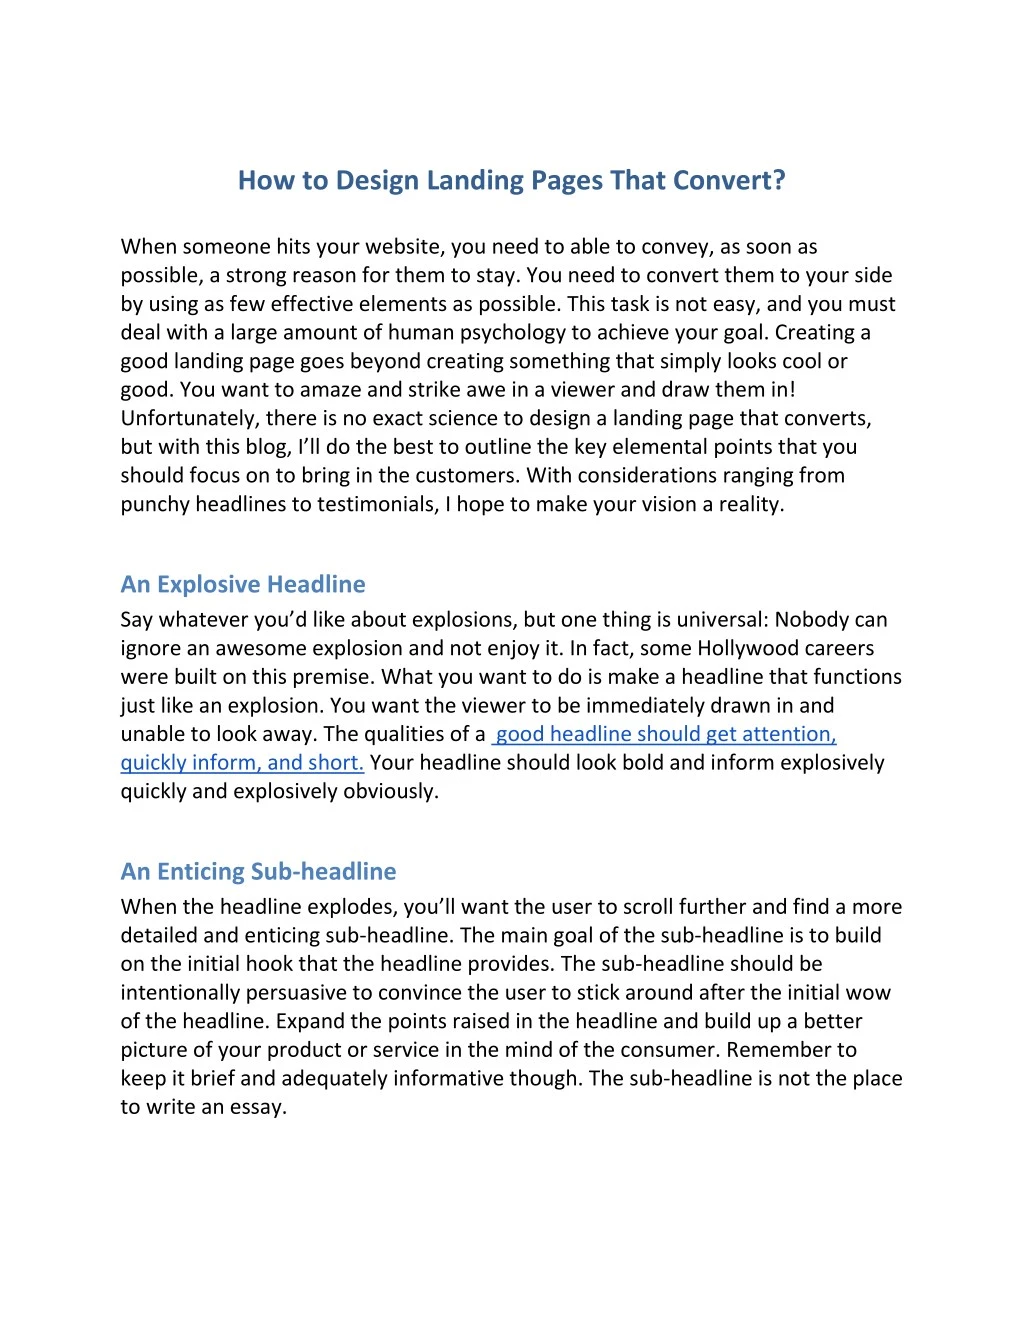 how to design landing pages that convert